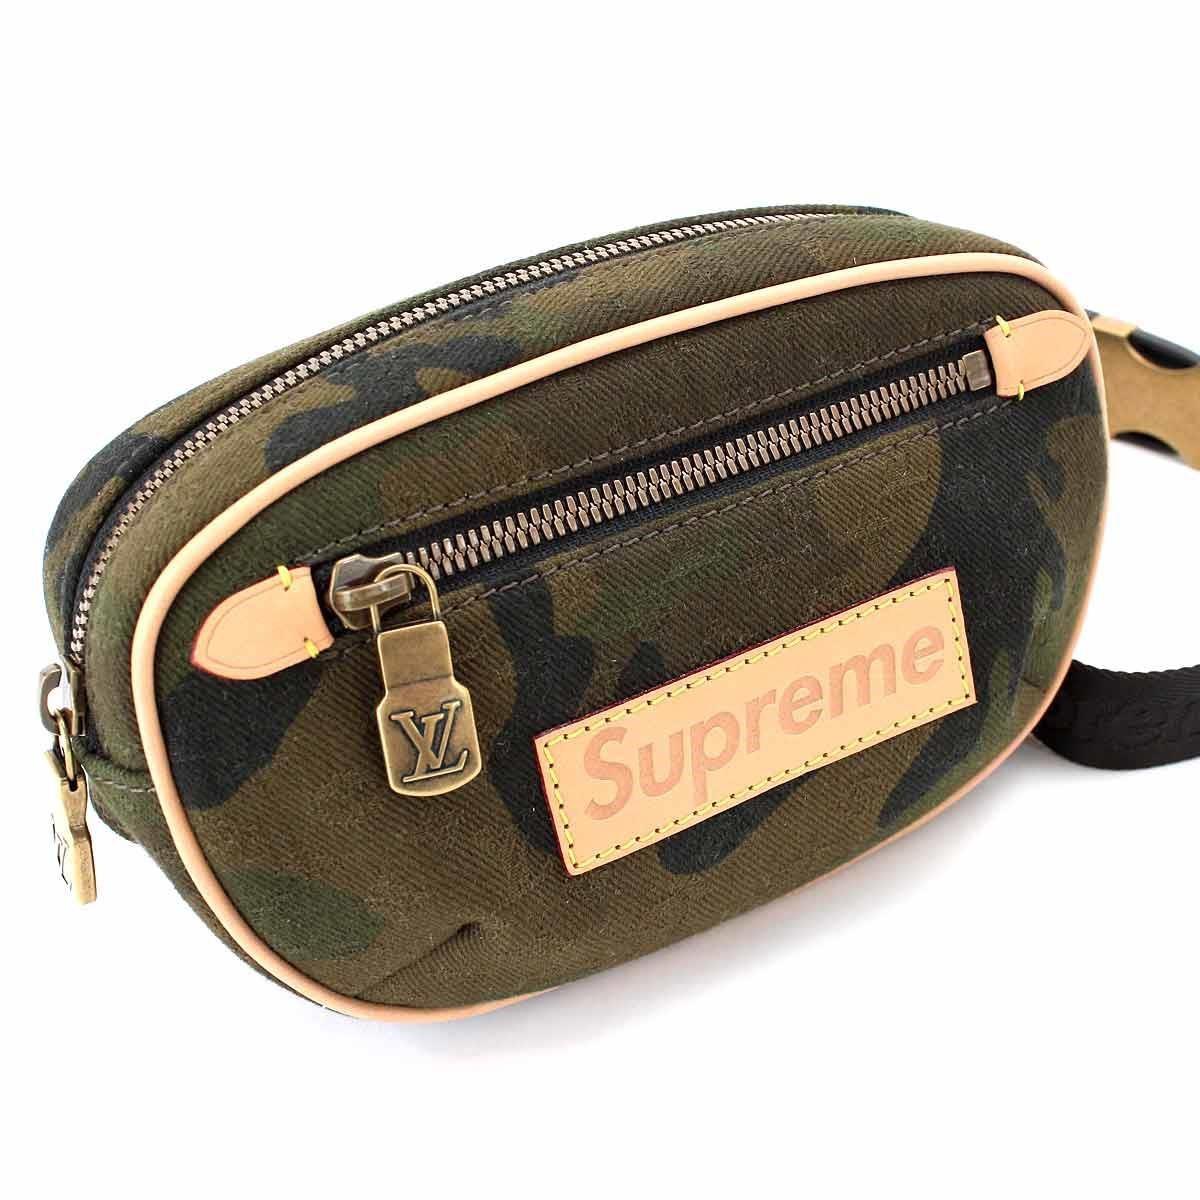 Louis Vuitton Canvas Supreme Bumbag Pm Body Bag Camouflage M44202 90045039.. in Green for Men - Lyst